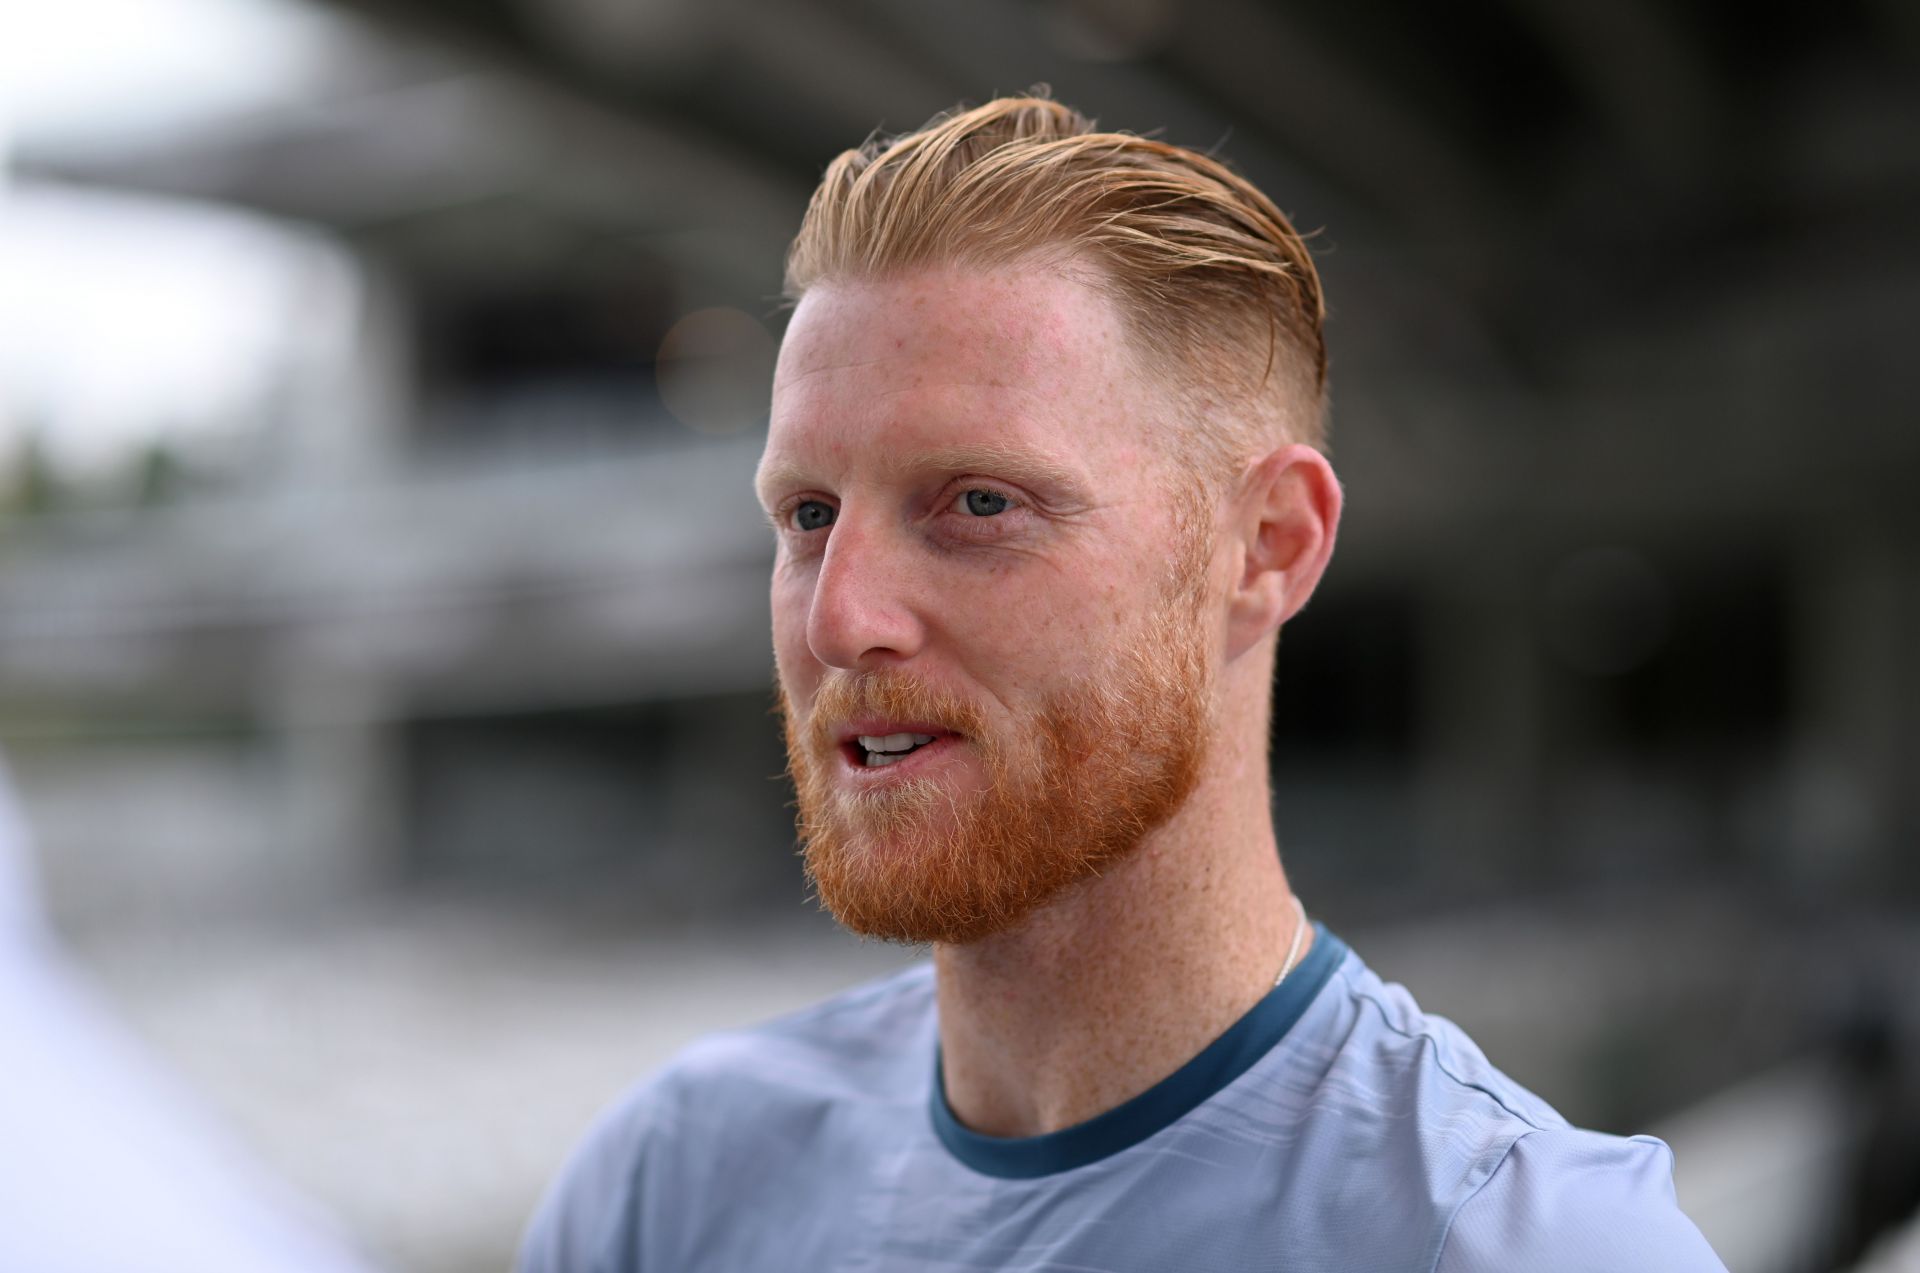 Ben Stokes lost his father in December 2020, when he was away playing for England (Image Credits: Getty)